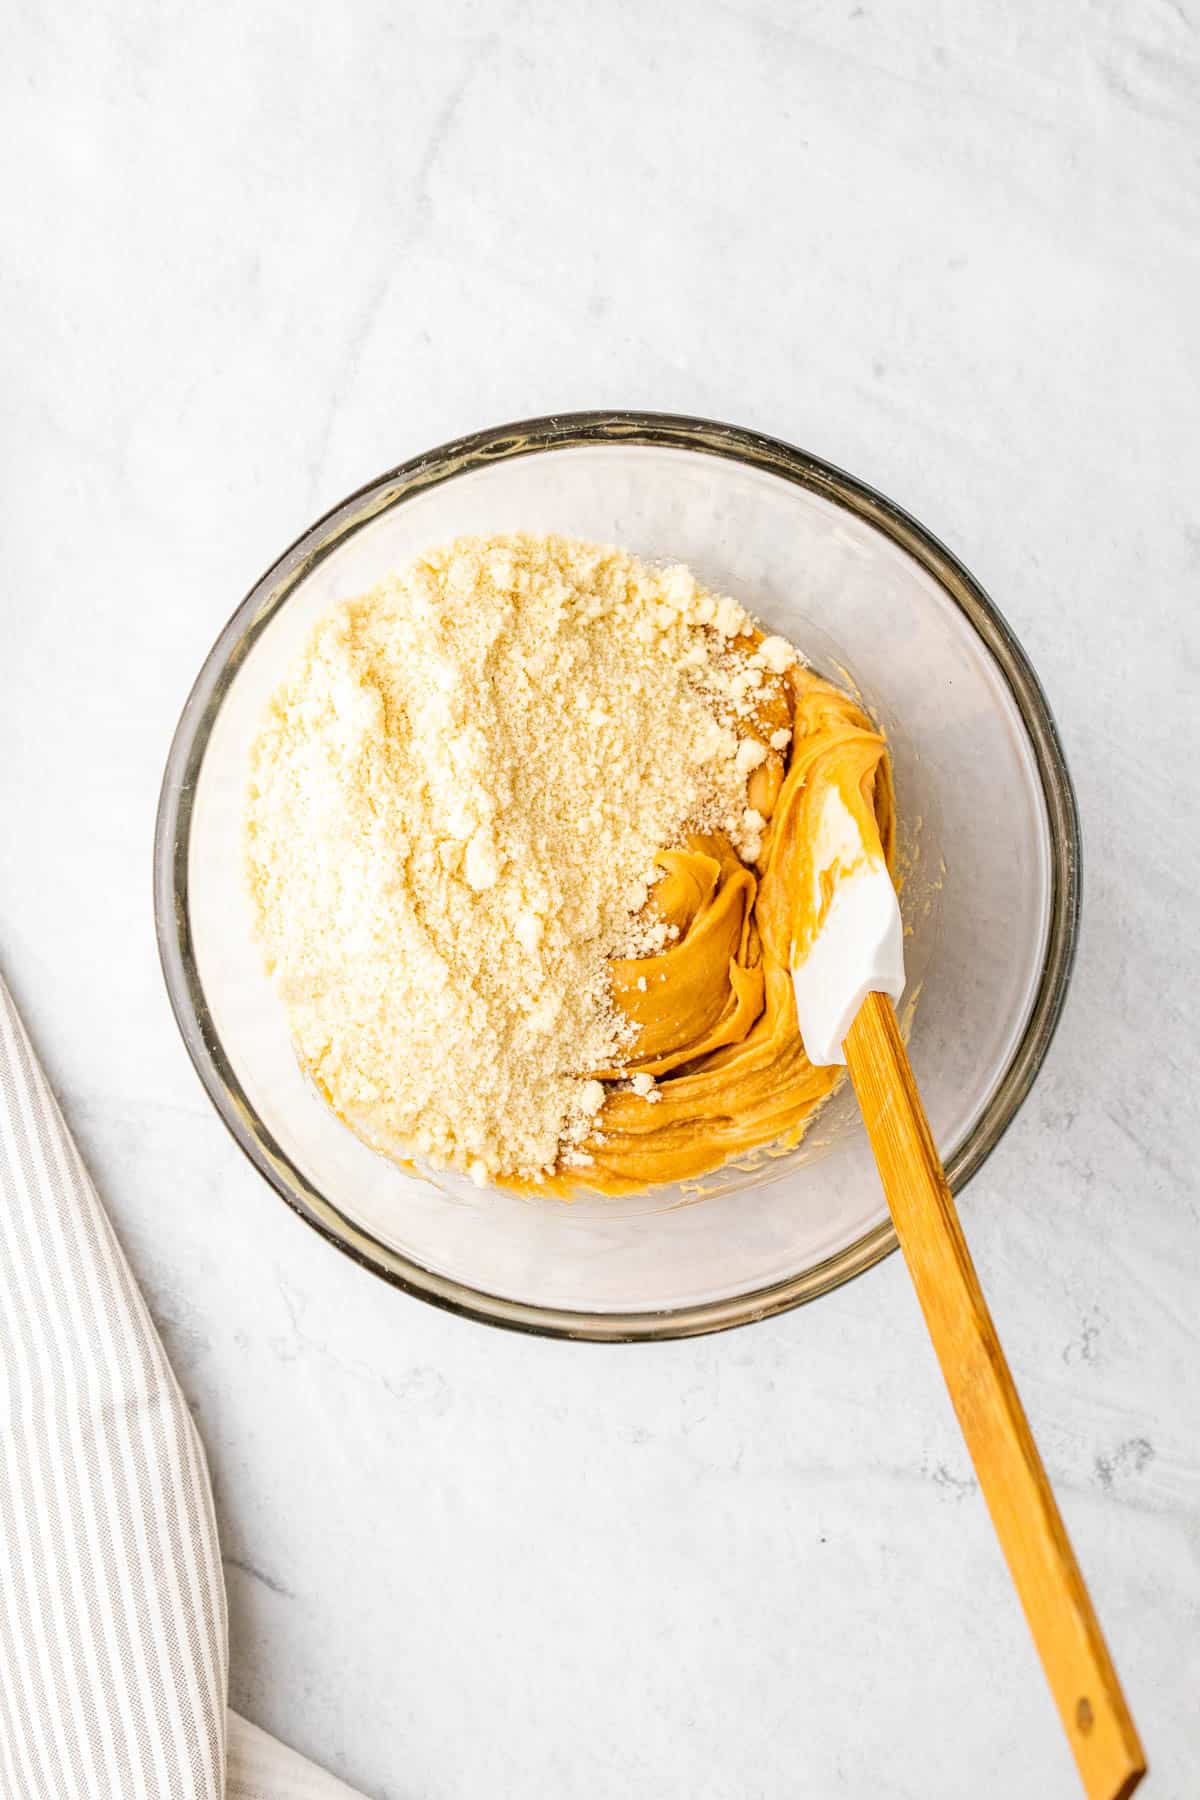 Flour added to peanut butter mixture in a clear bowl with a spatula.